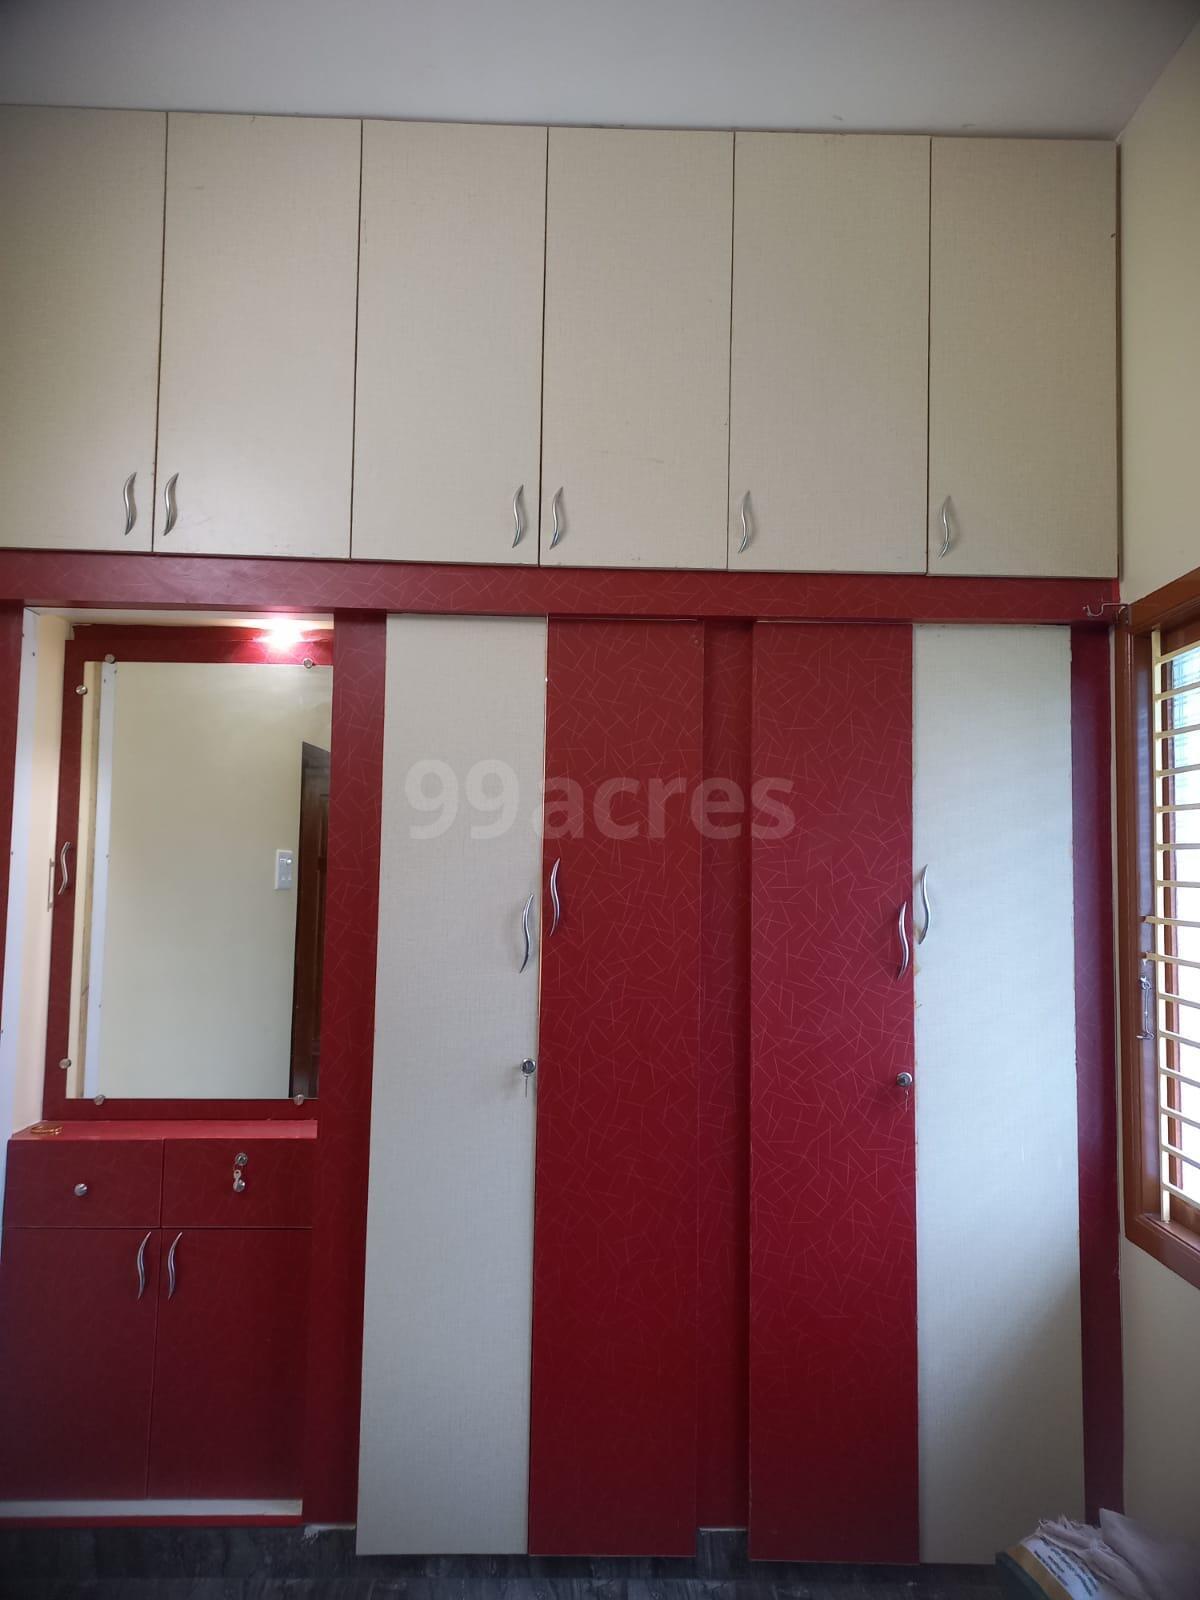 8038-for-sale-2BHK-Residential-Independent-House-Rs-6600000-in-Cuddalore-Cuddalore-Cuddalore